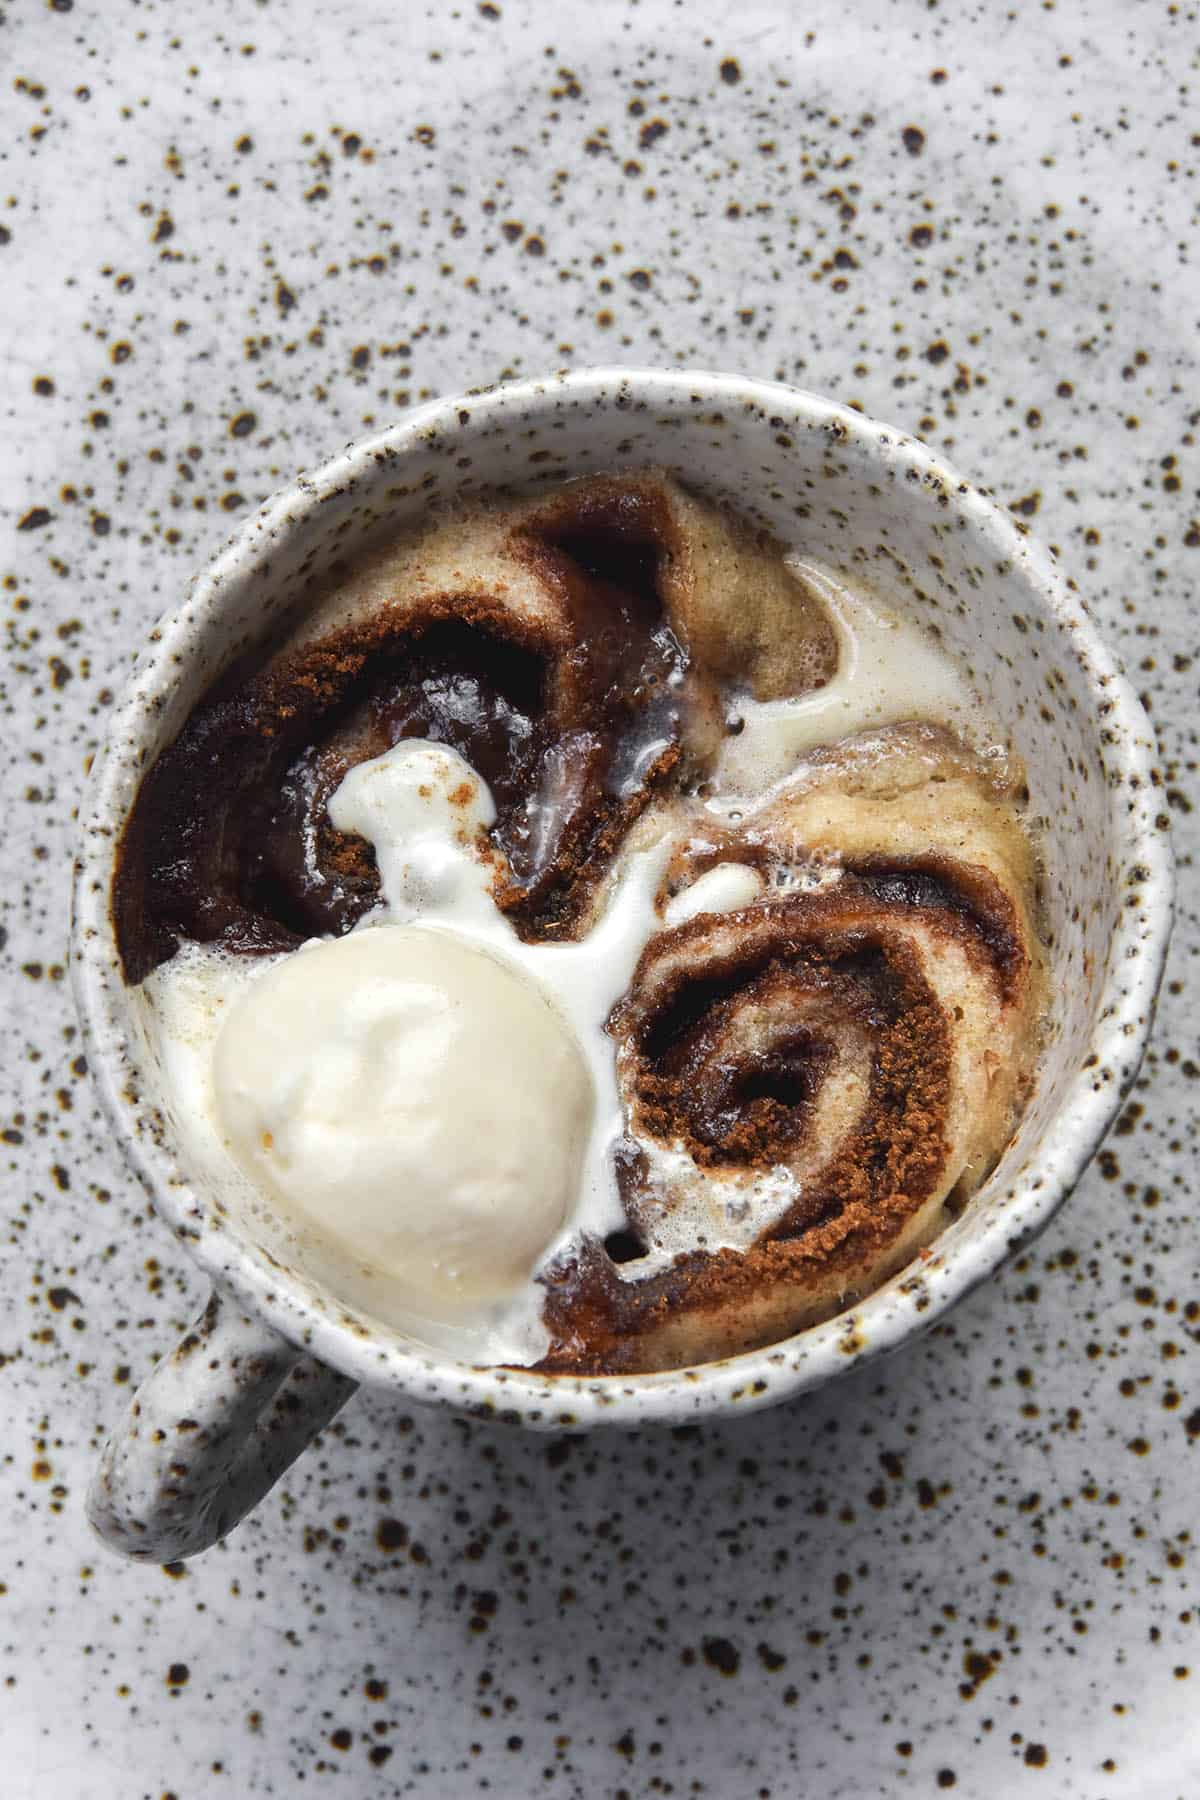 An aerial image of a vegan, gluten free microwave cinnamon scroll in a white speckled ceramic mug. The scroll is oozing cinnamon sugar and topped with melting vanilla ice cream. It sits atop a white speckled ceramic plate